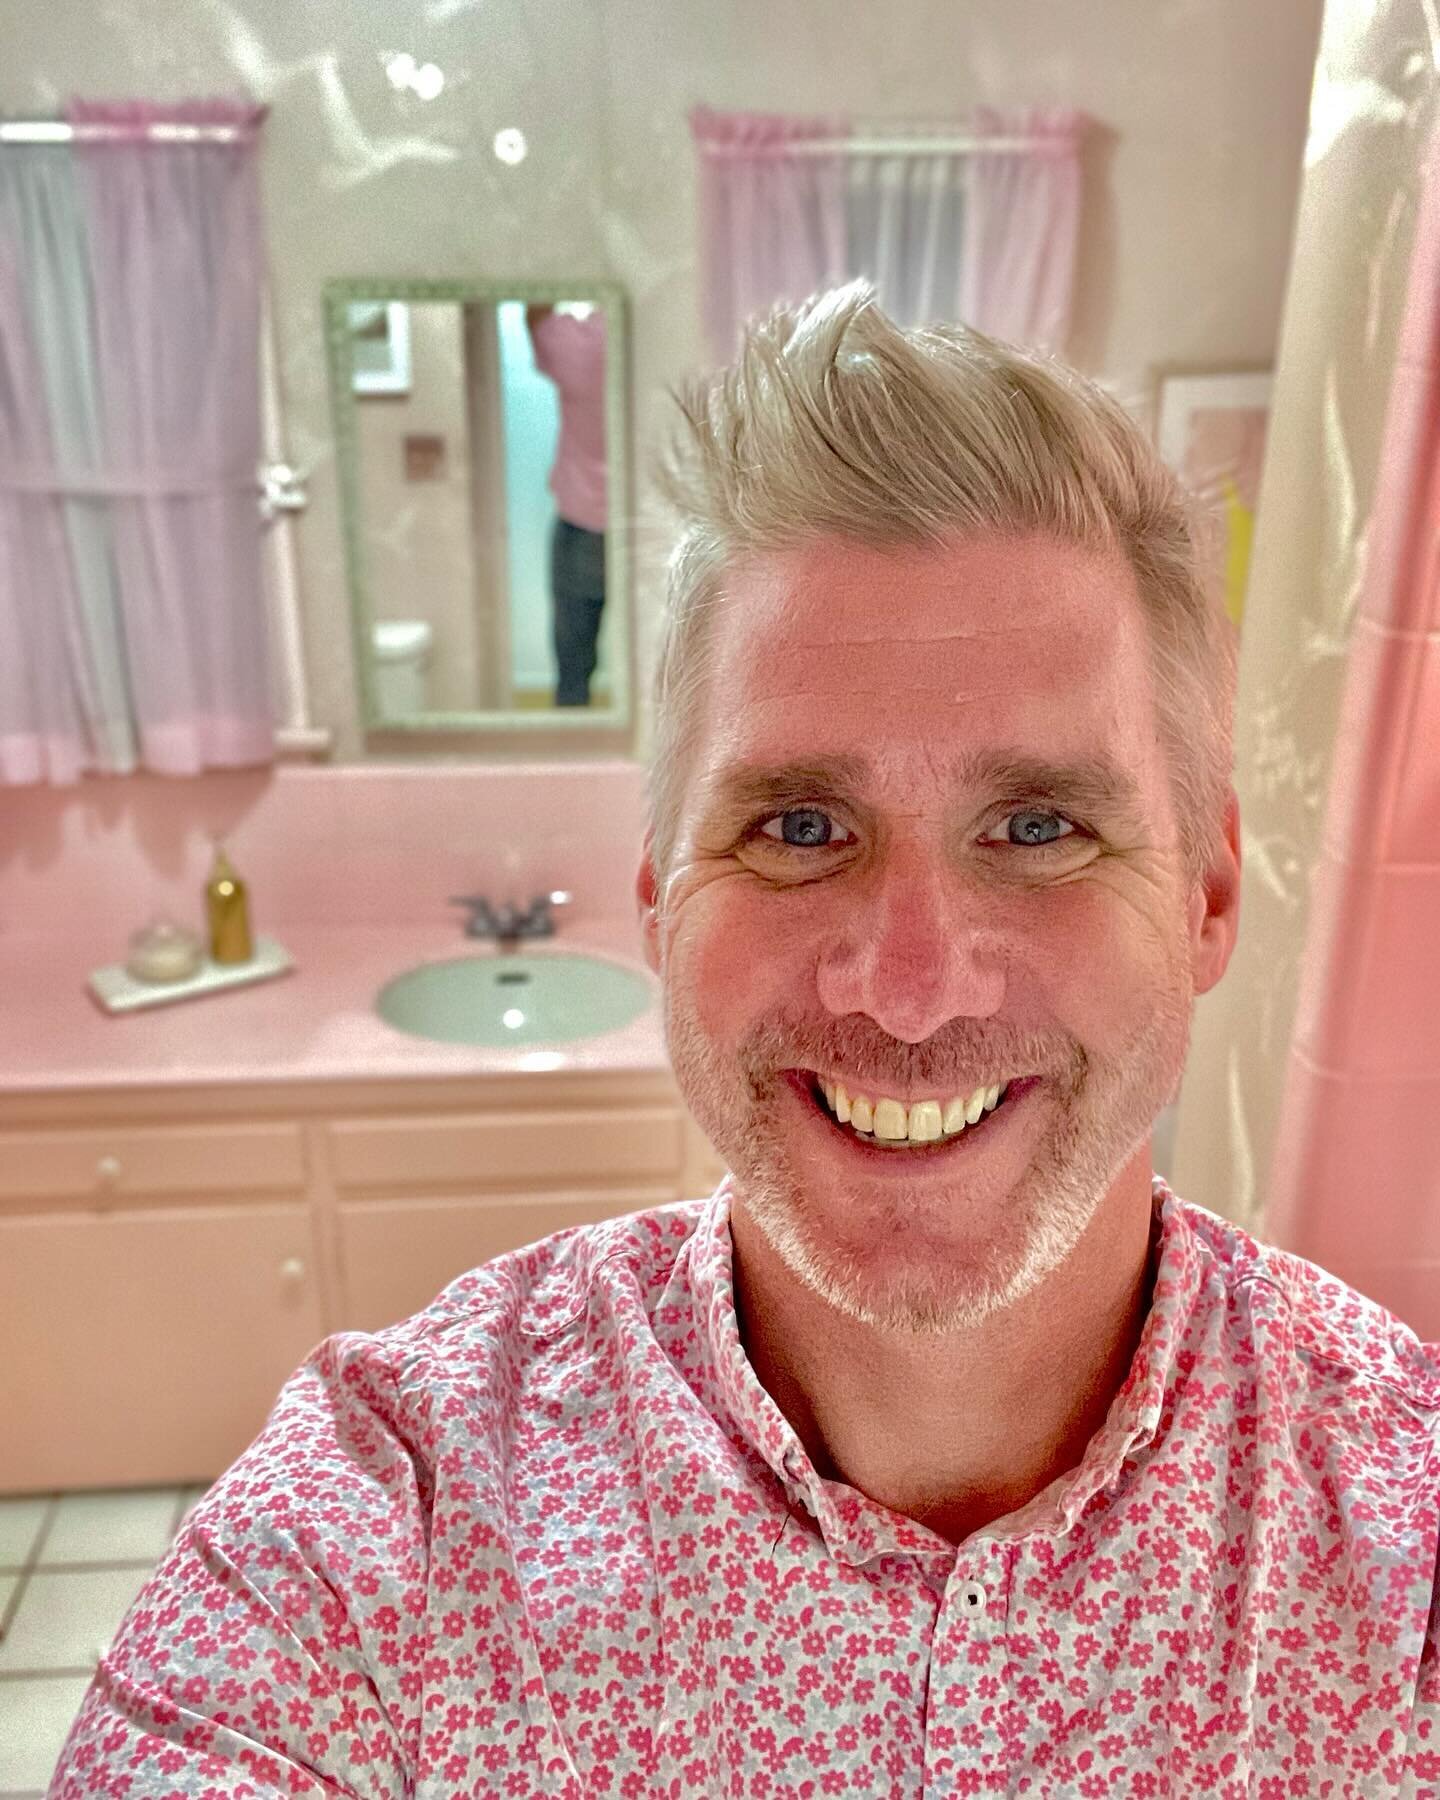 Ever dream of having your own Barbie Bathroom? At 3720 Reklaw in Studio city, your dreams become reality.  Contact me for more information. #barbie #barbieworld #barbiedreamhouse #listingagent #dadlife #topherkeeferrealtor #thenellteam #listing #call